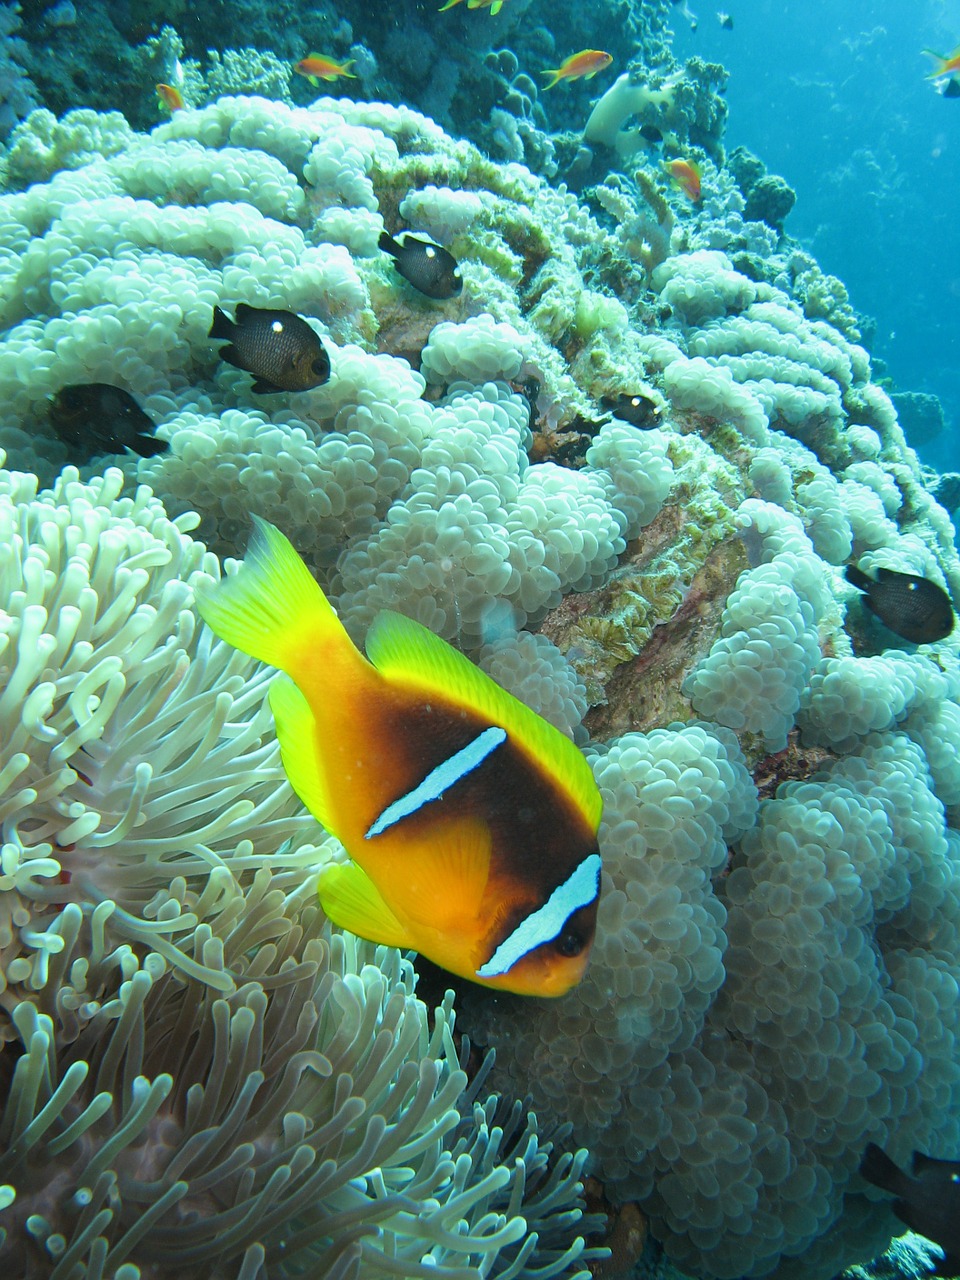 amphiprion red sea clown fish free photo